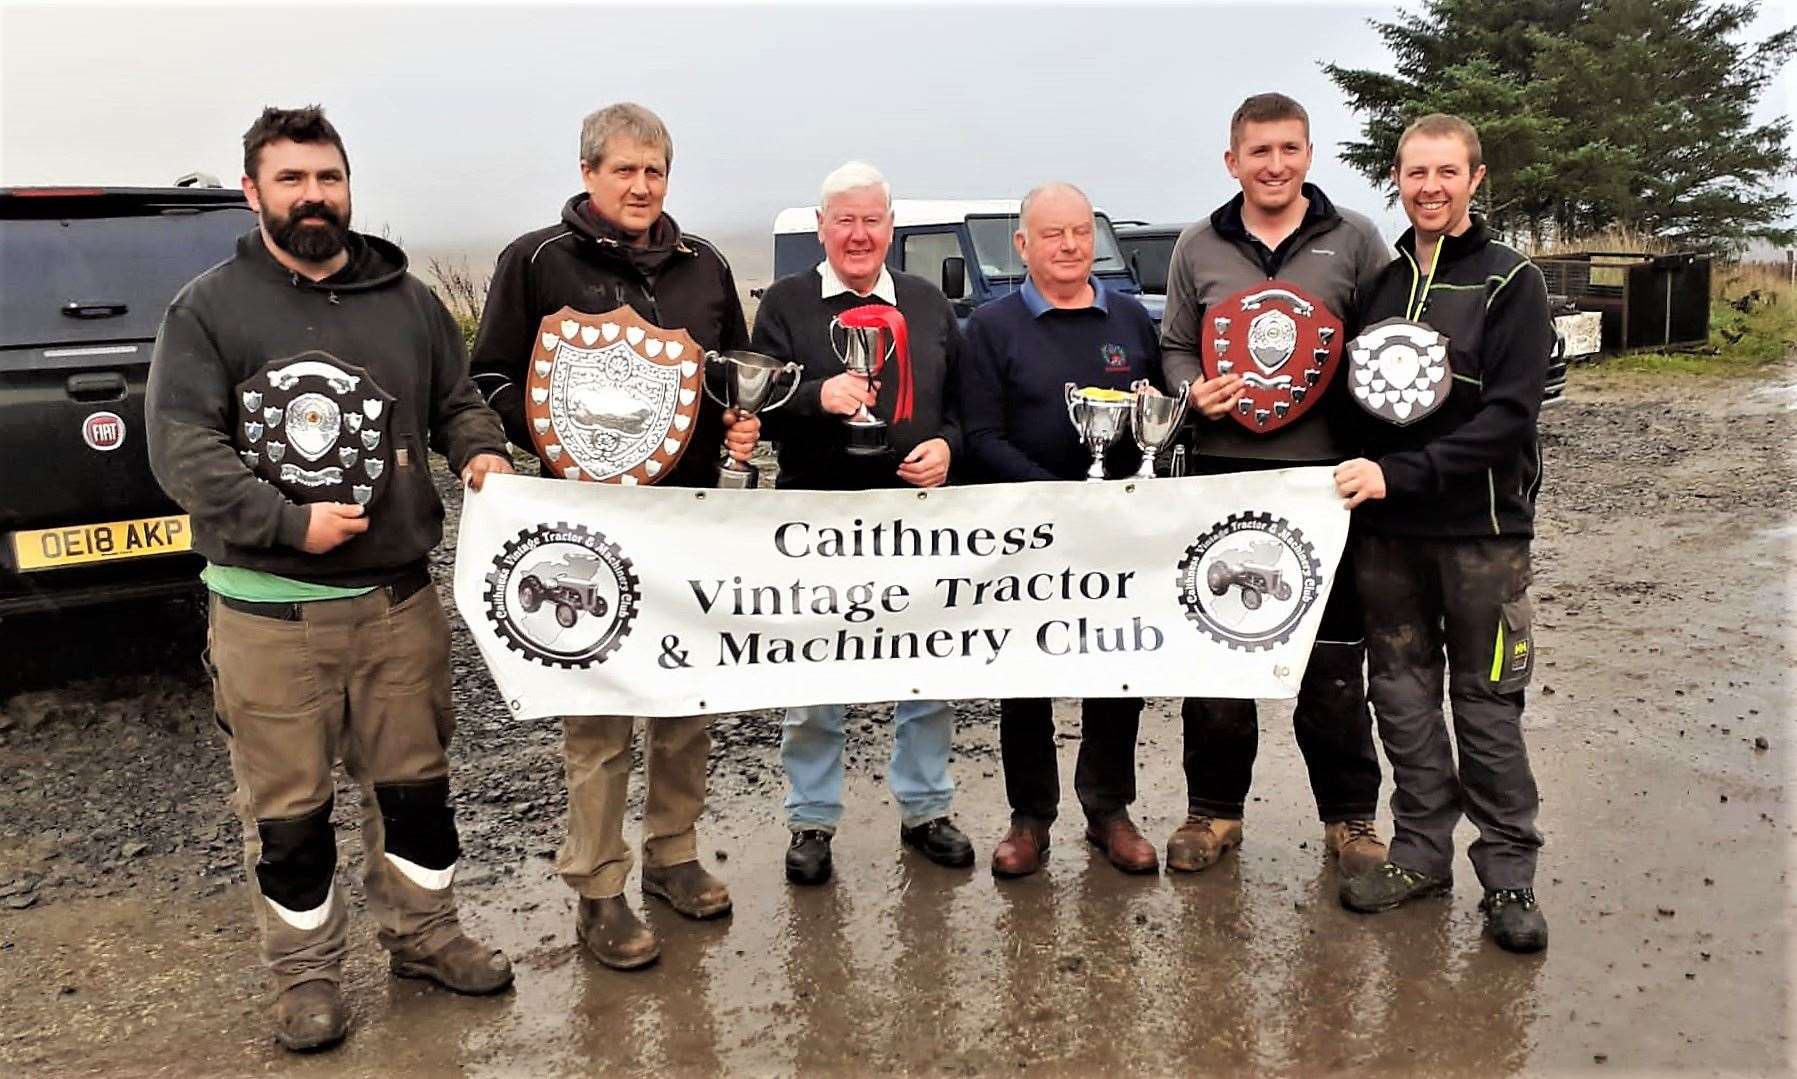 Winners announced at the end of the day were from left, Jamie Sinclair, Michael Mackay, Gerald Macleod, Johnny Matheson, Stevie Blackwood and Graeme Mackay.